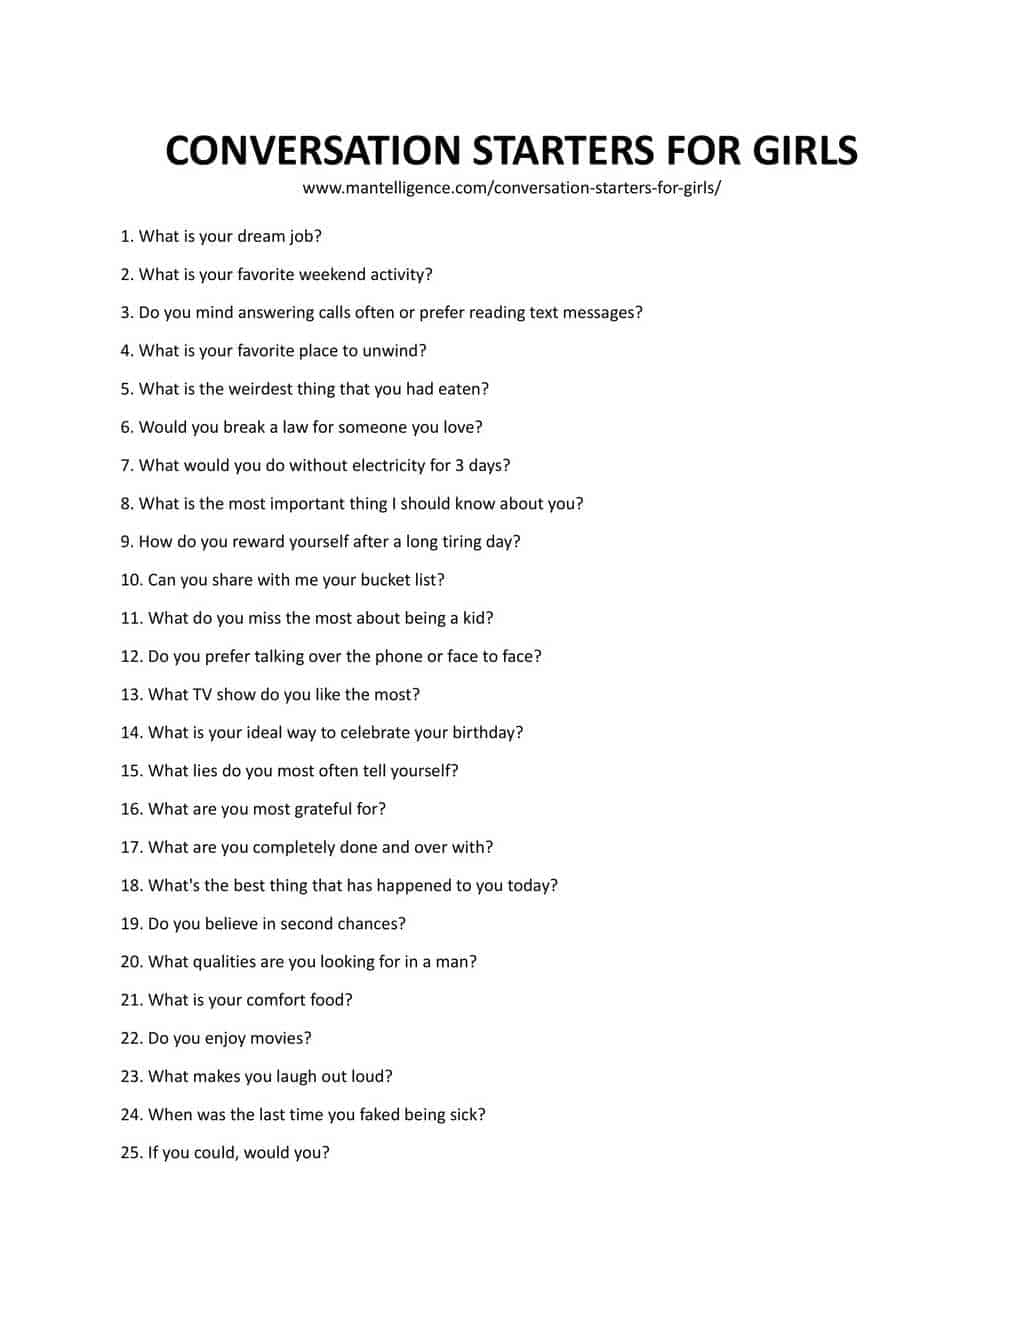 Downloadable and printable list of conversation starters